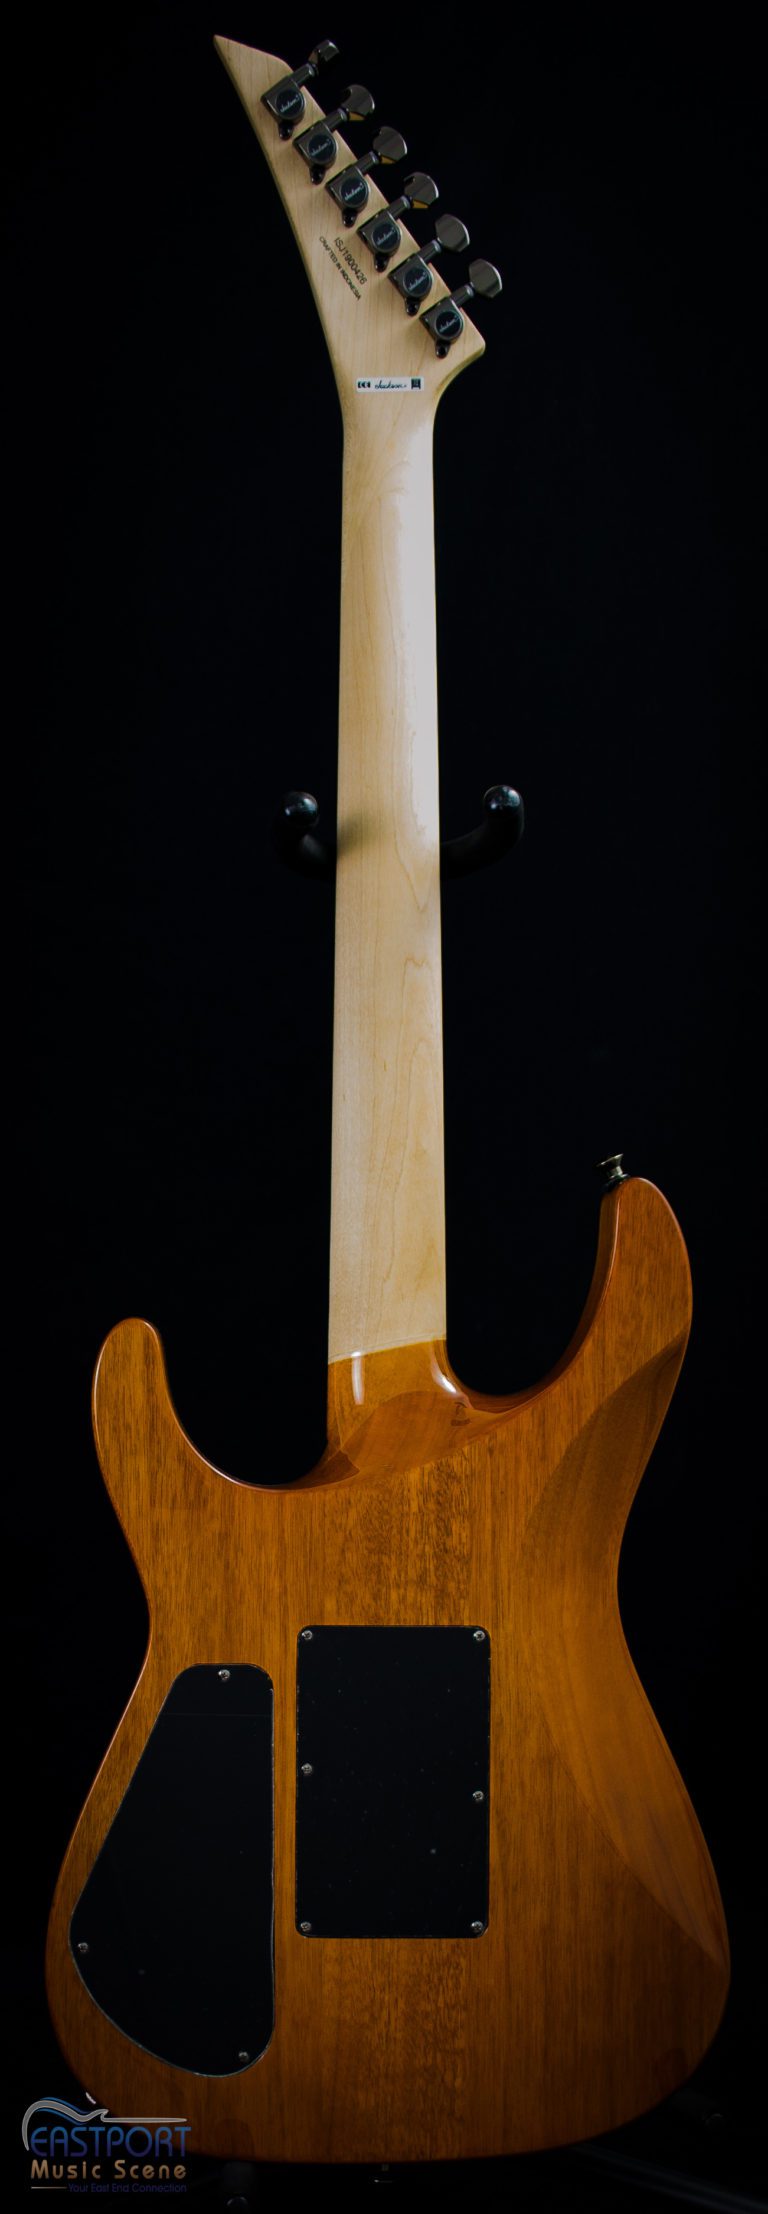 A guitar with the neck and headstock turned to the side.